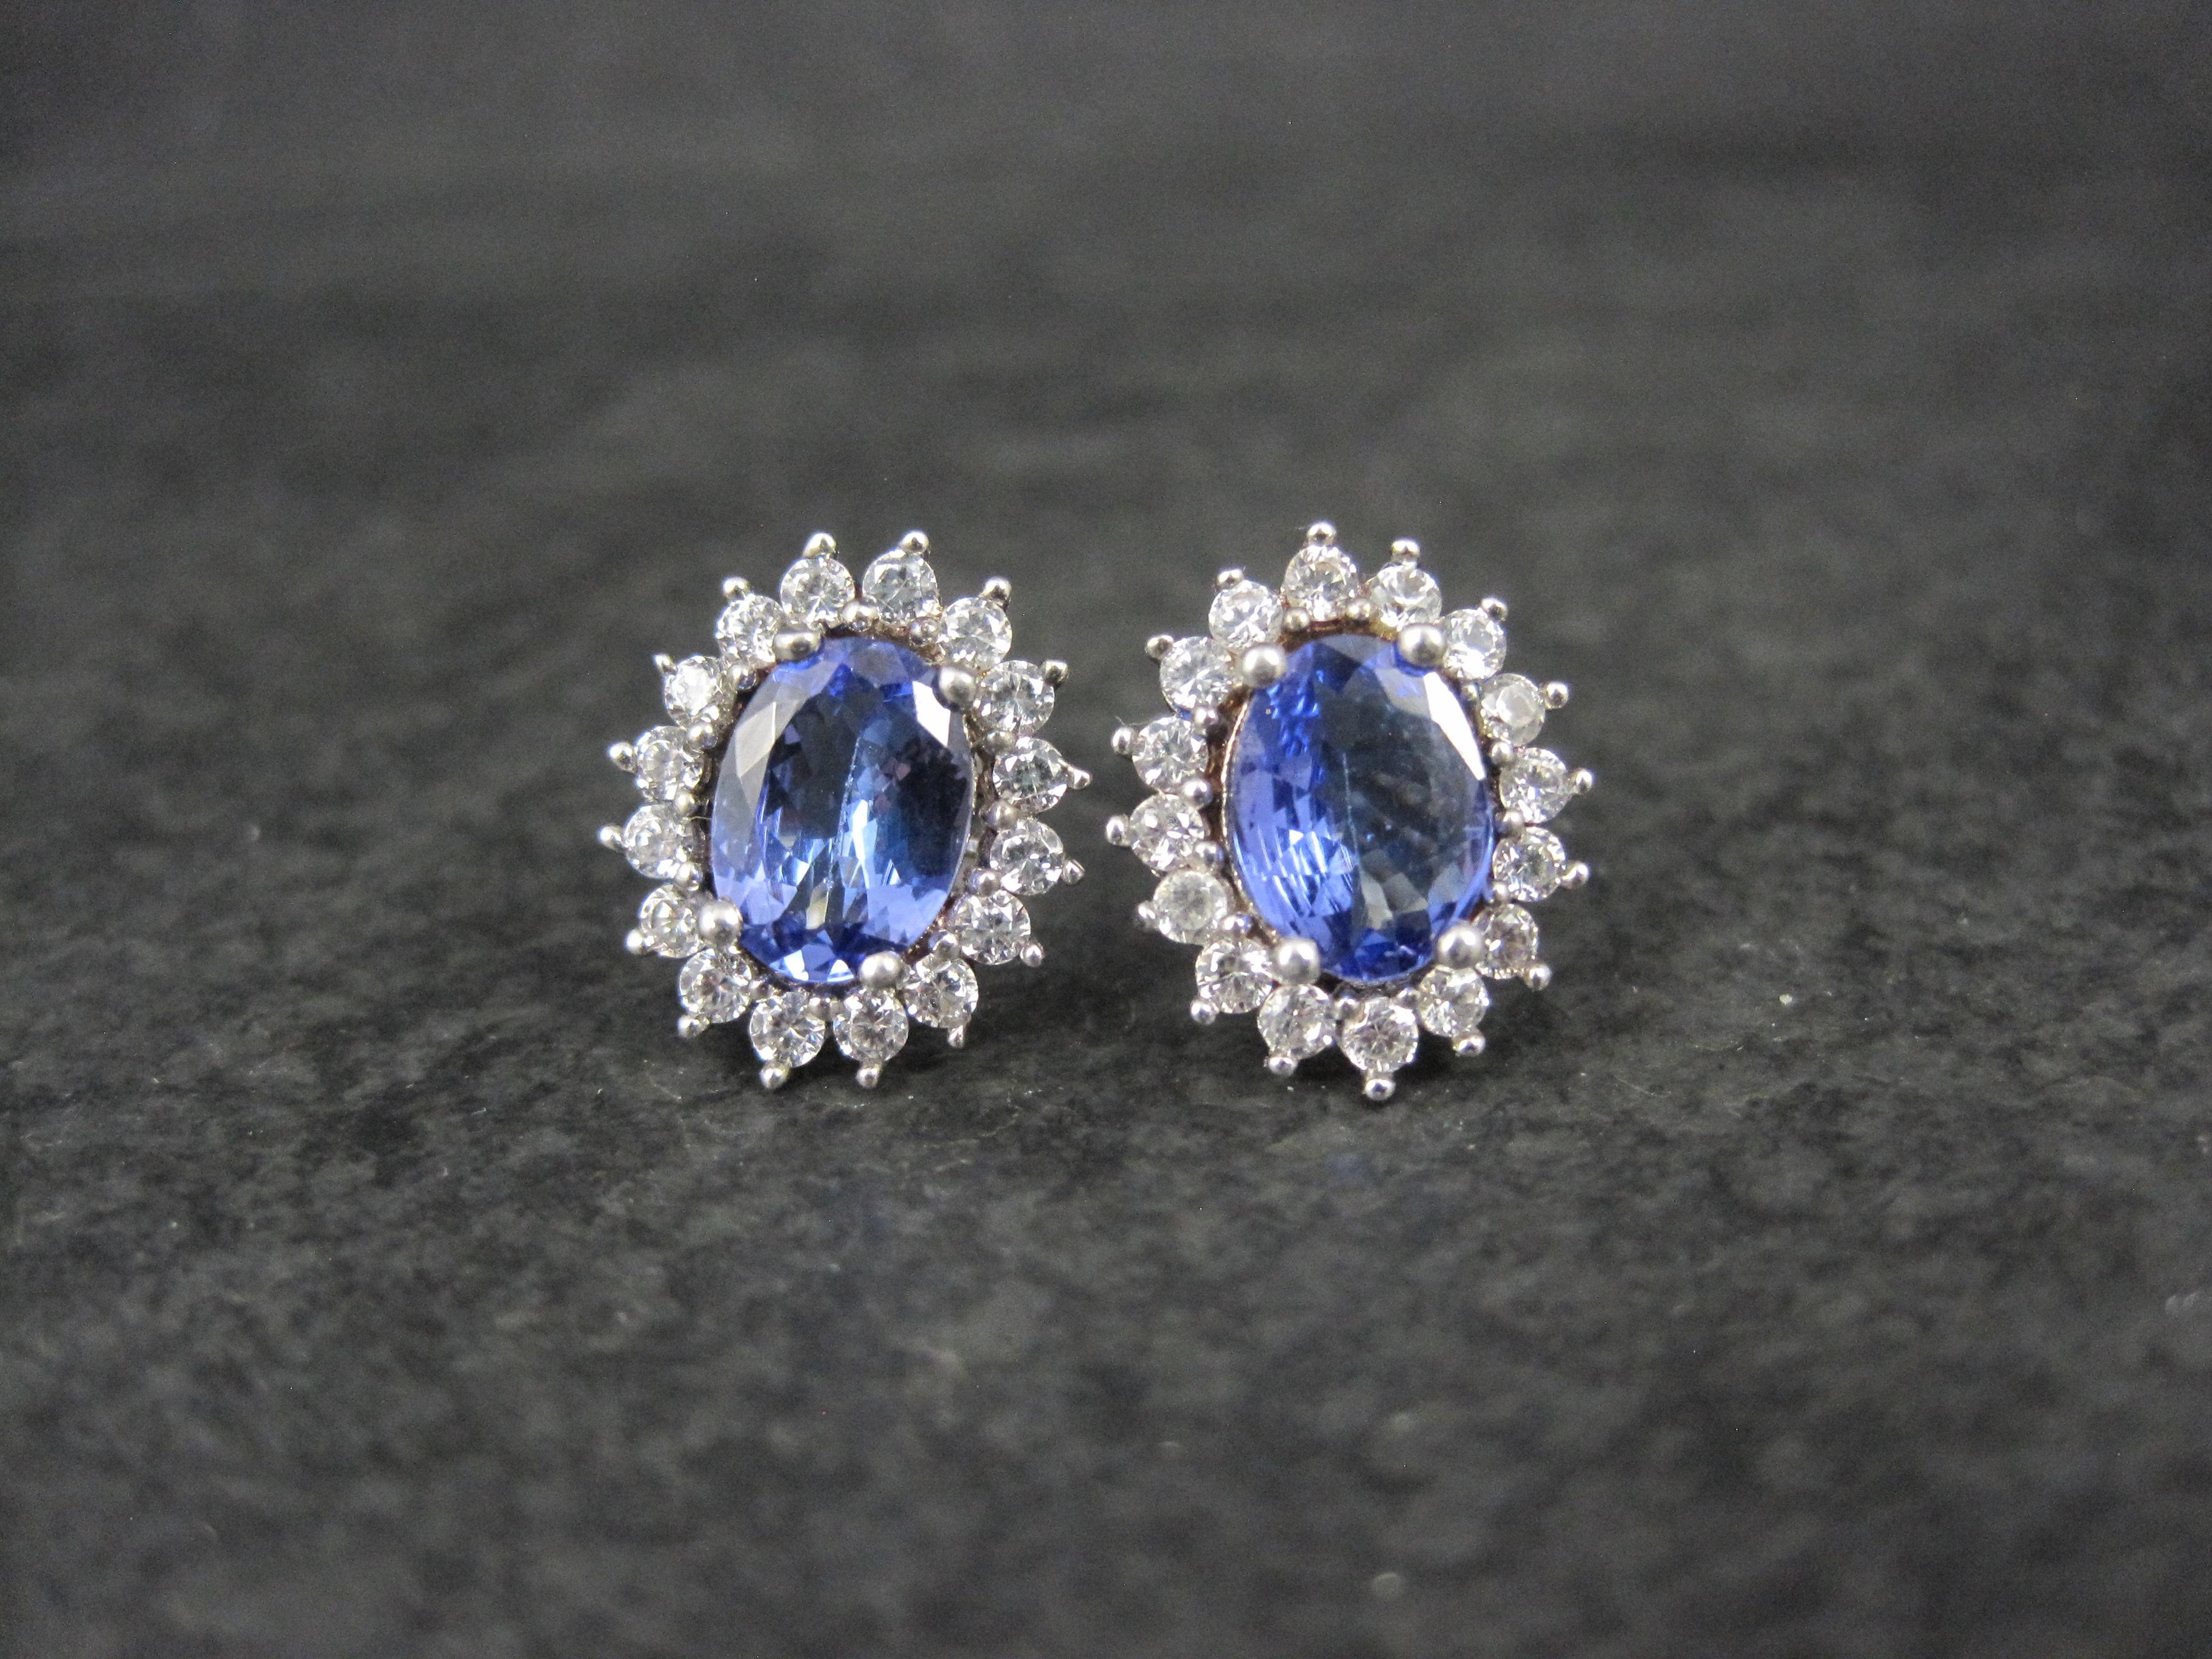 These gorgeous stud earrings are sterling silver.
They feature 6x8mm oval cut tanzanites surrounded by a halo of  round cut 2mm white spinel.

Measurements: 7/16 by 9/16 of an inch

Originally from Kay Jewelers these earrings retailed for over